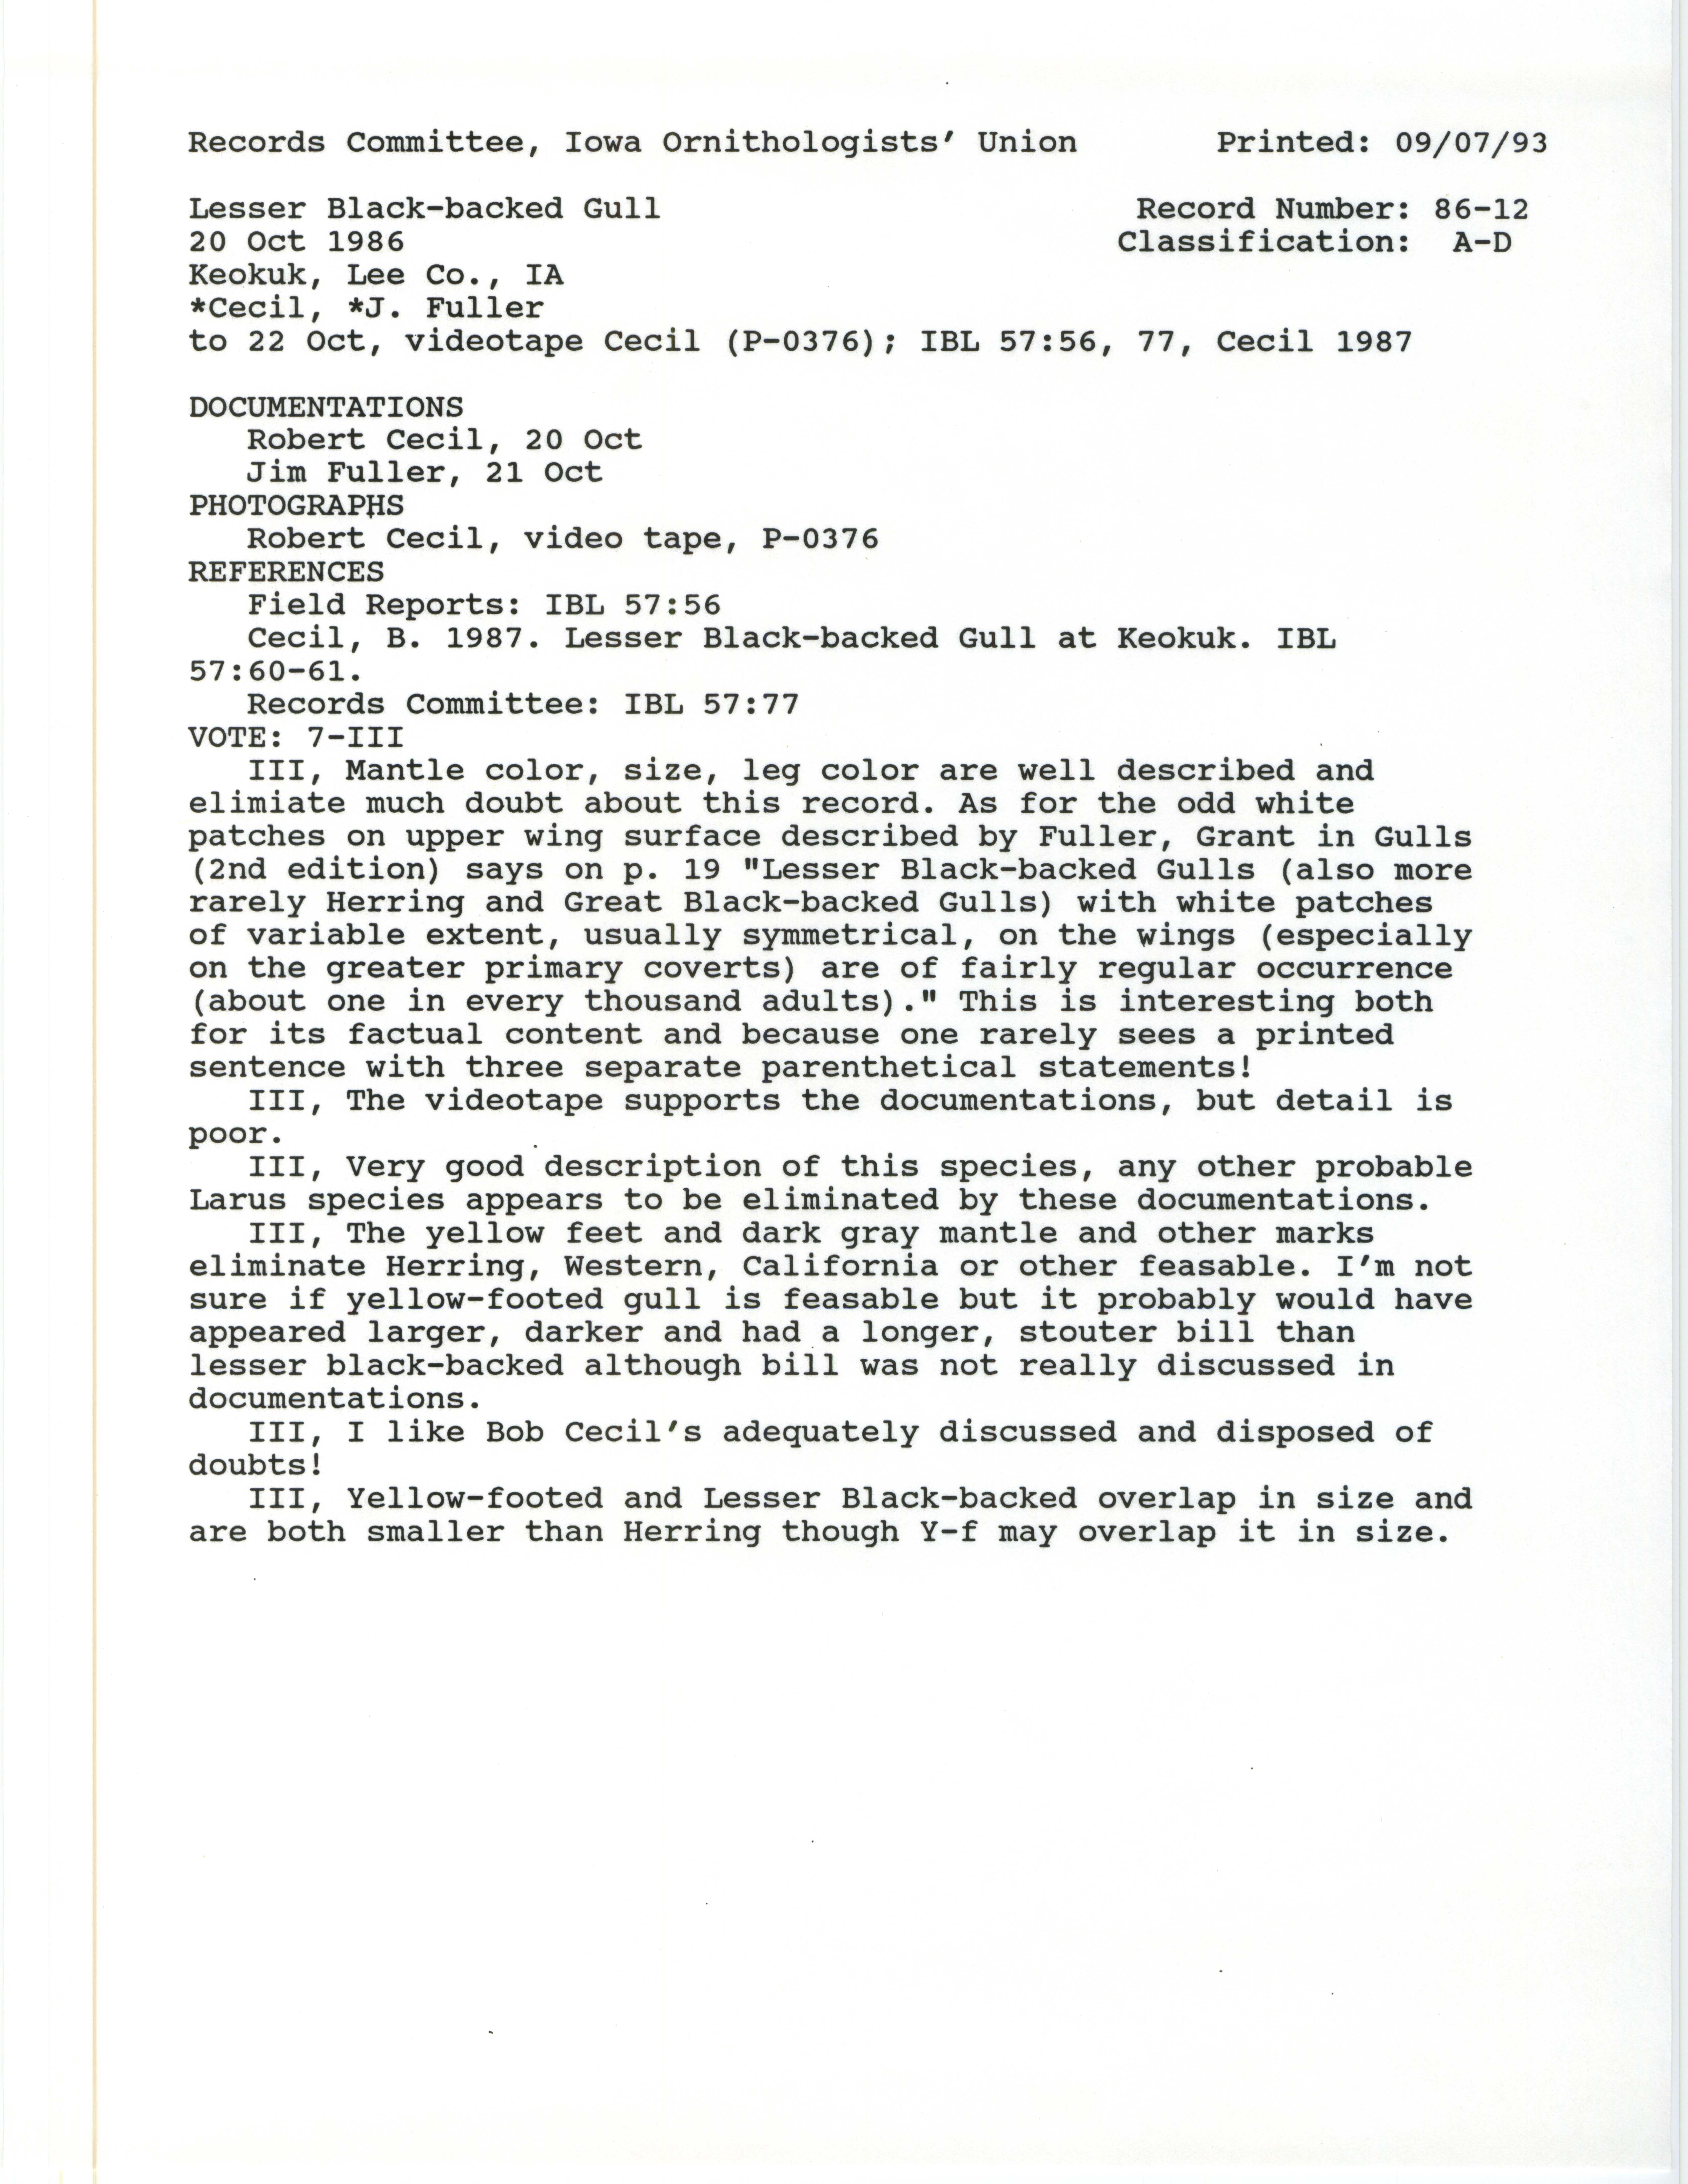 Records Committee review for rare bird sighting of Lesser Black-backed Gull at Lock and Dam 19 in Keokuk, 1986